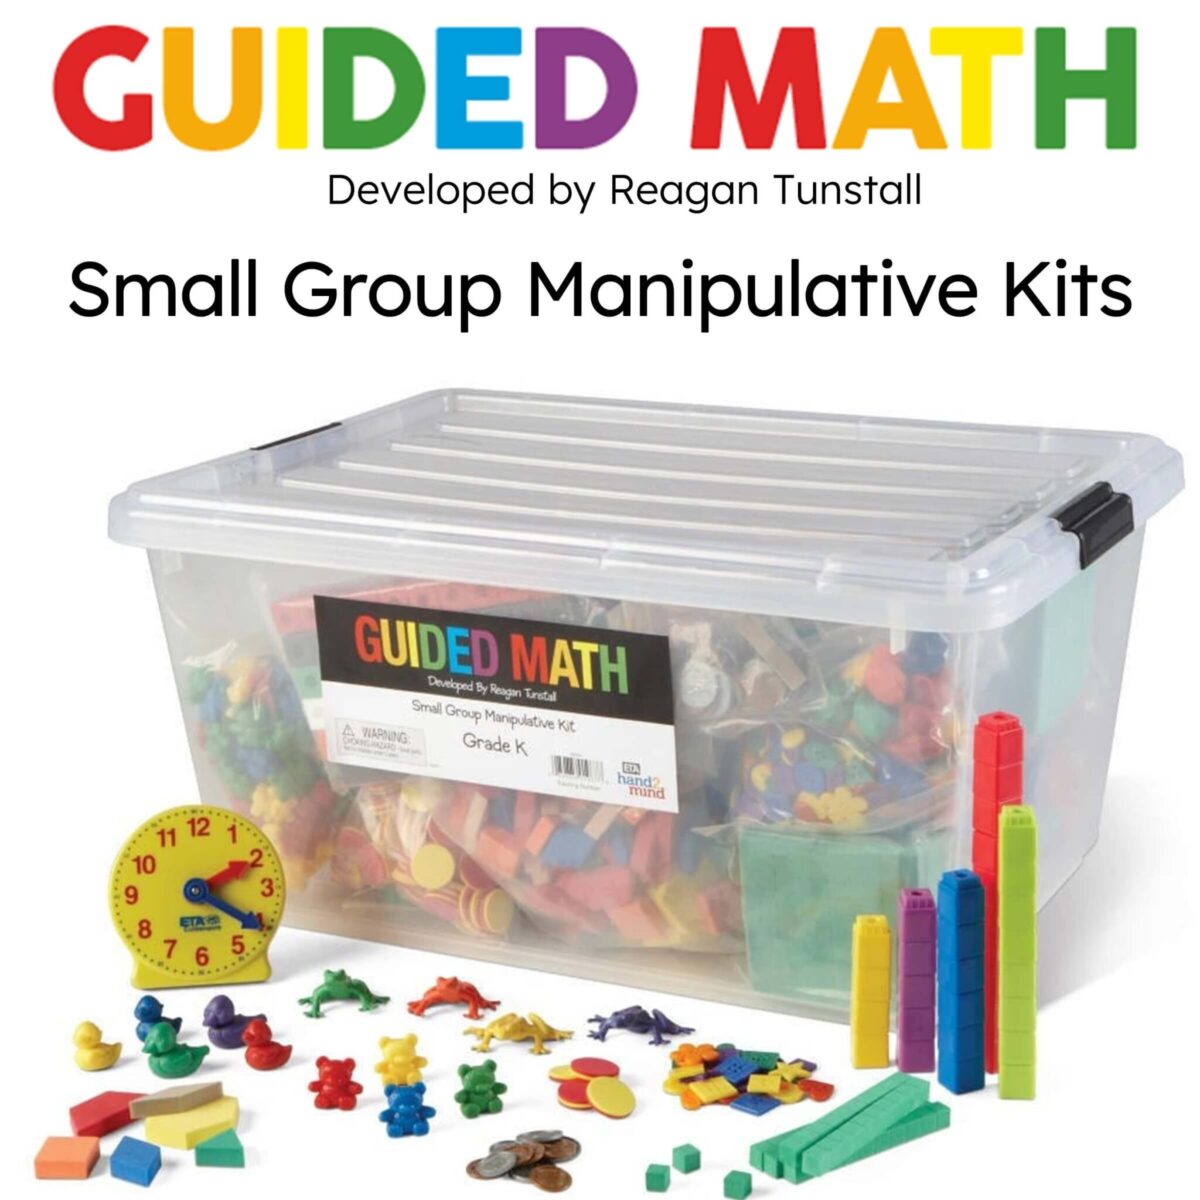 Hands-on math tools learning kits